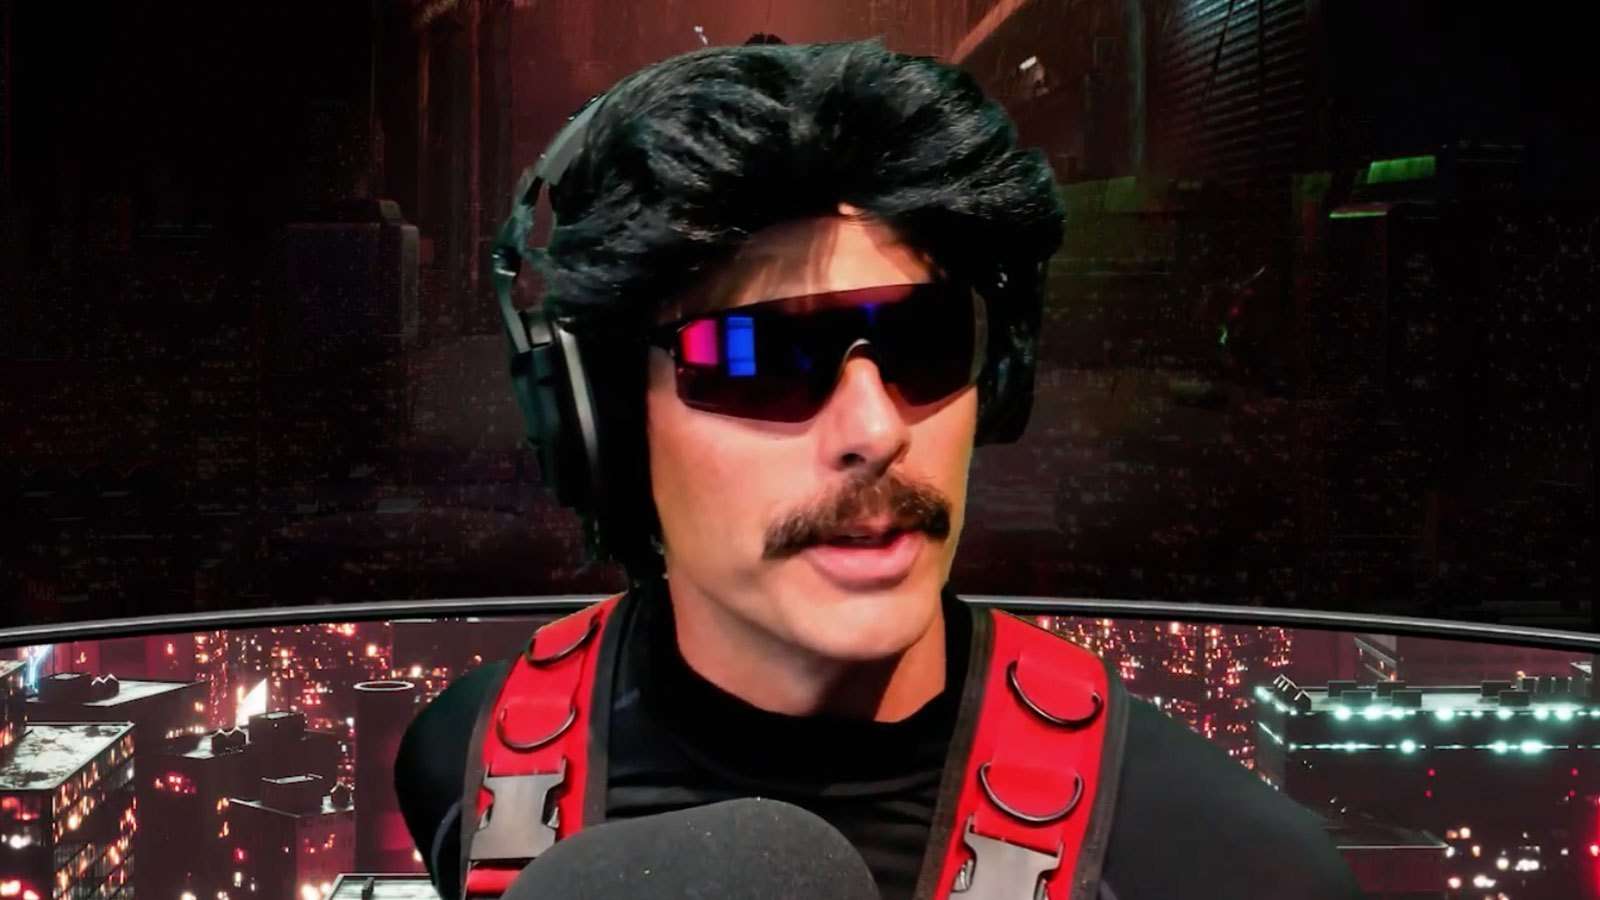 Dr Disrespect and Shroud both returned to streaming within a week of each other.